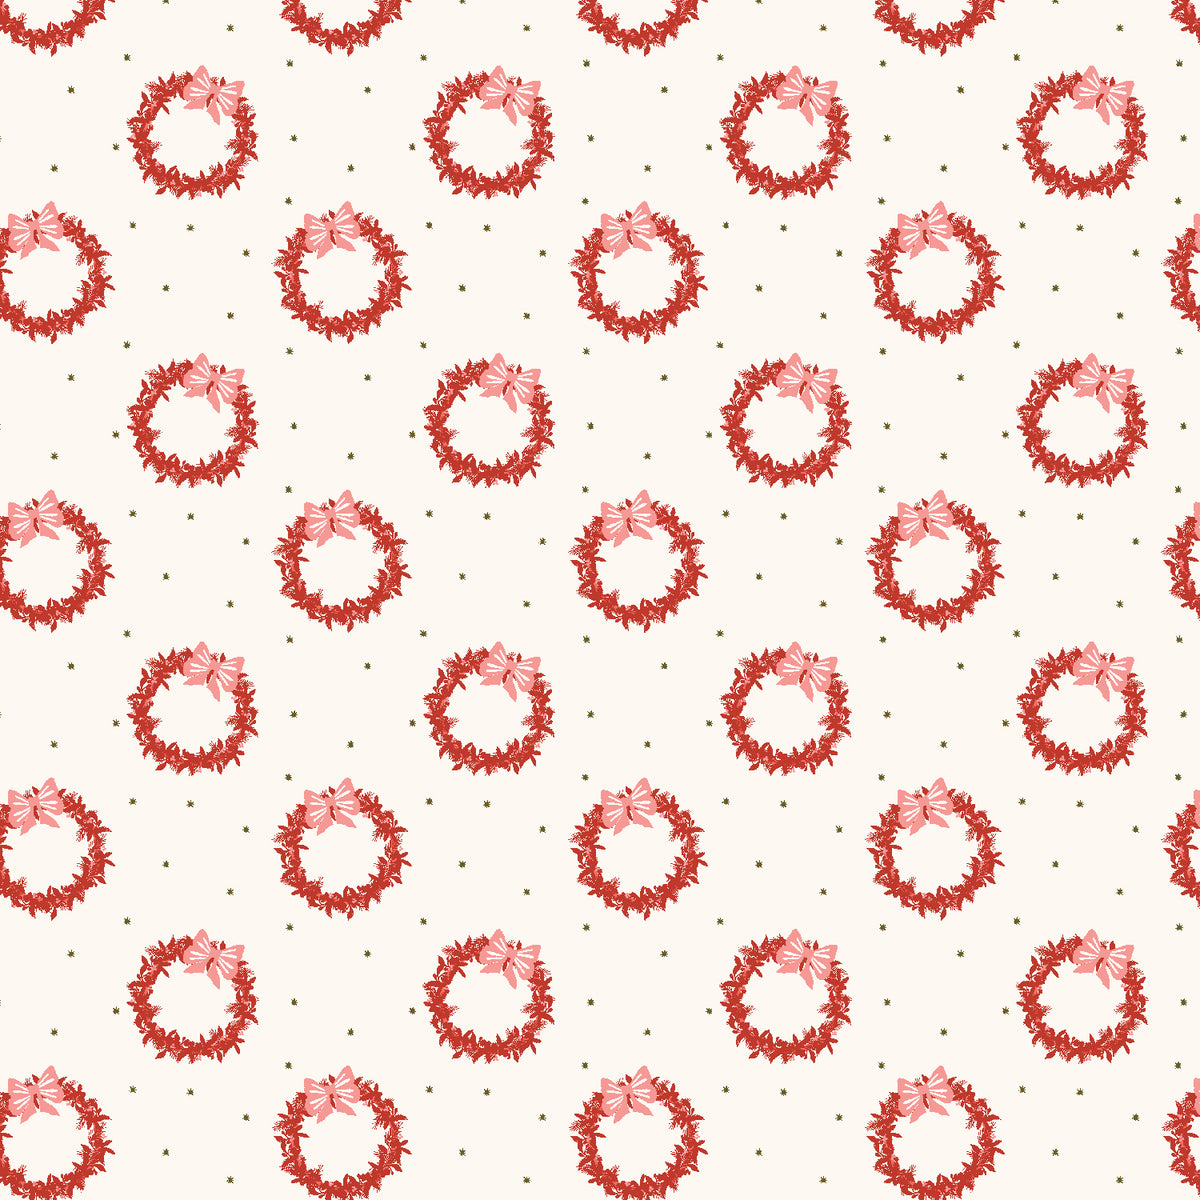 Tinsel on the Trail Quilt Fabric by Cotton+Steel - Wreath in Candy Cane (Cream/Red) - AC601-CC2